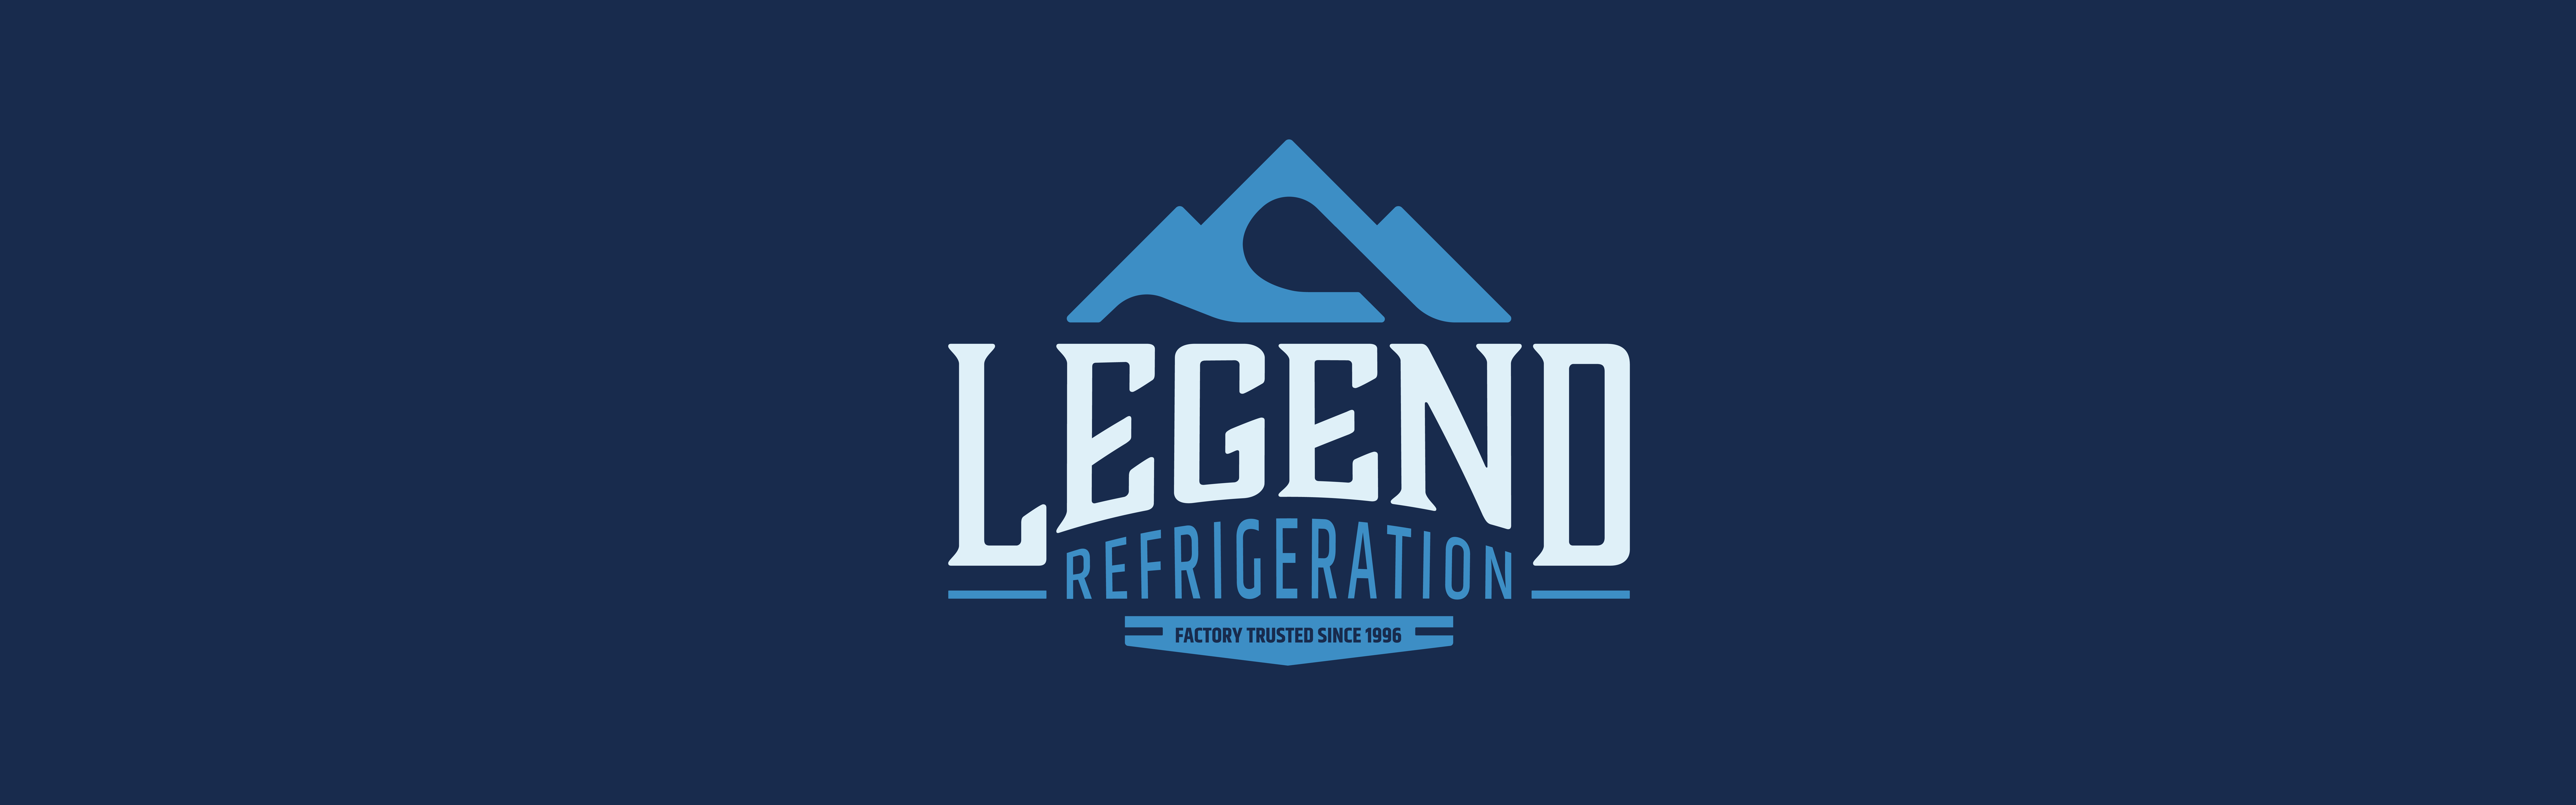 Logo of "Legend Refrigeration" featuring stylized mountain peaks above the word "Legend," followed by the words "Refrigeration" underneath in bold lettering, with the tagline.